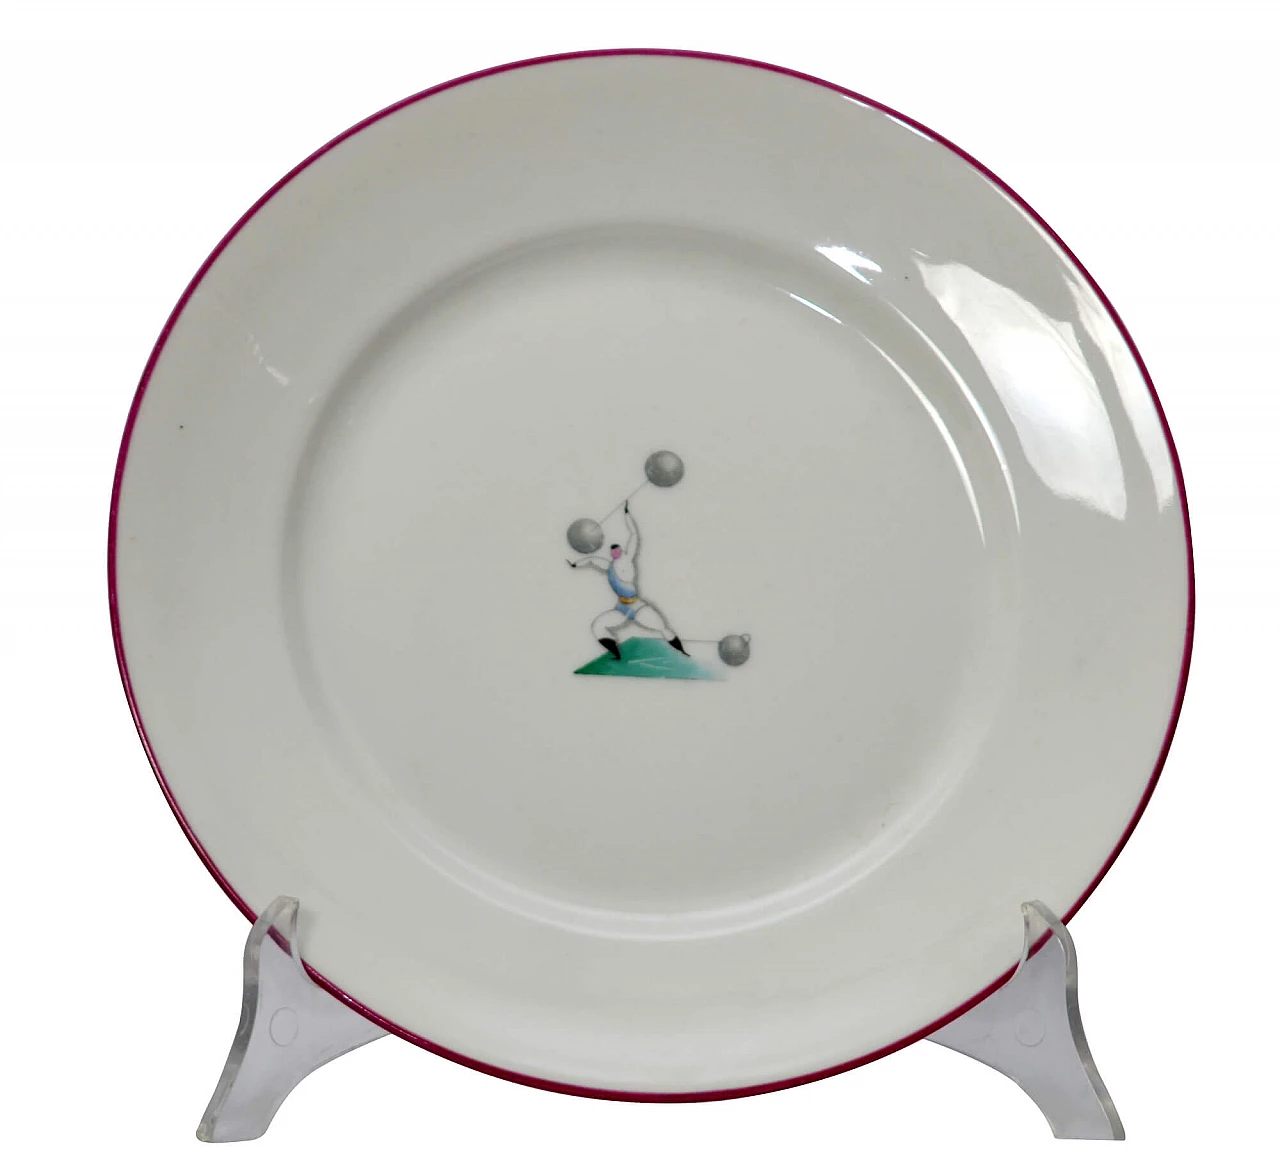 Porcelain plate from Gio Ponti's Il circo series, 1928 1302426